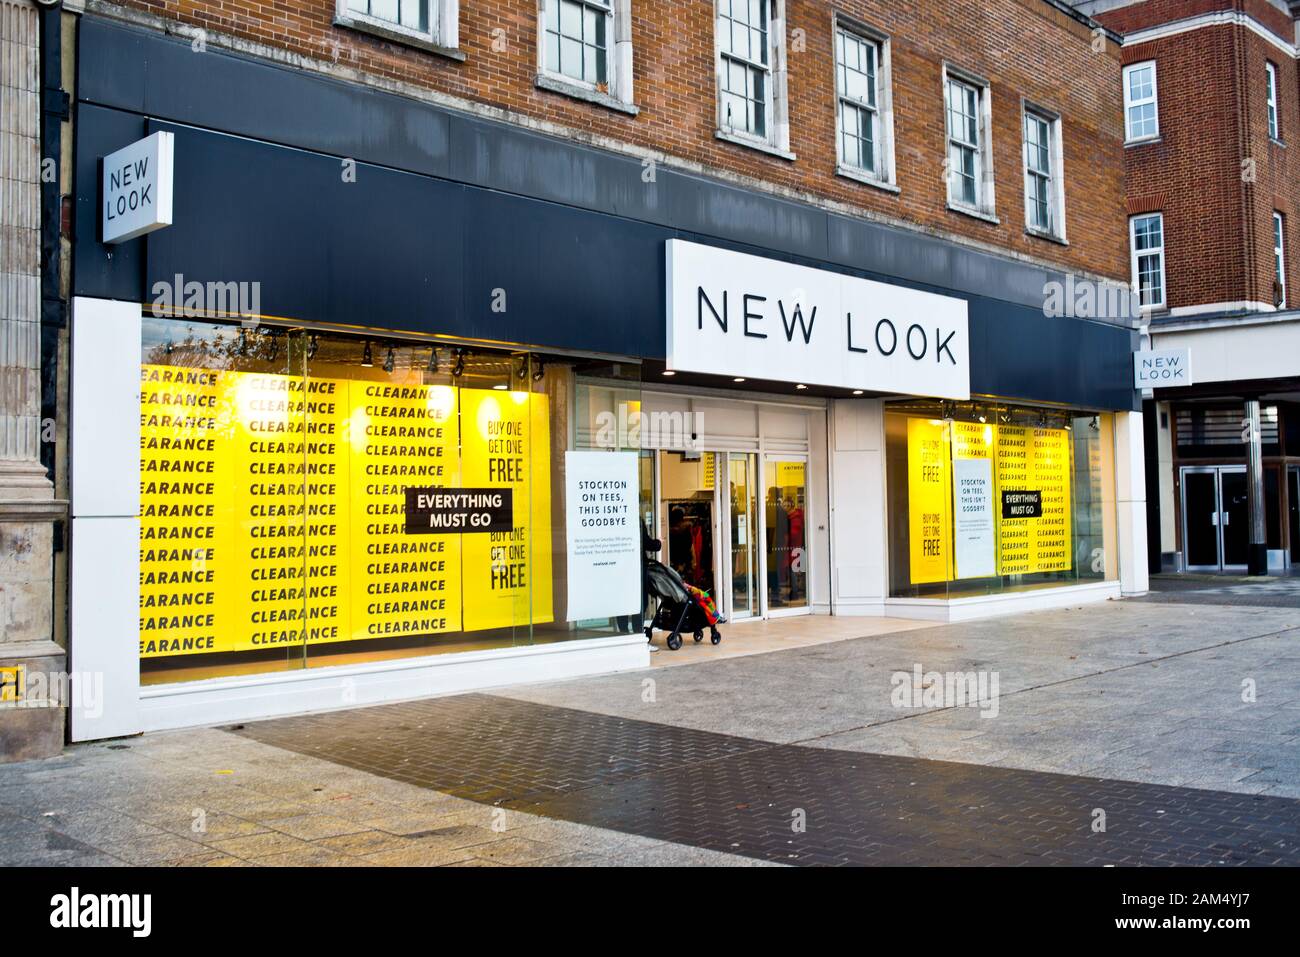 New Look Store Closing Down, High Street, Stockton on Tees, Cleveland, England Stockfoto